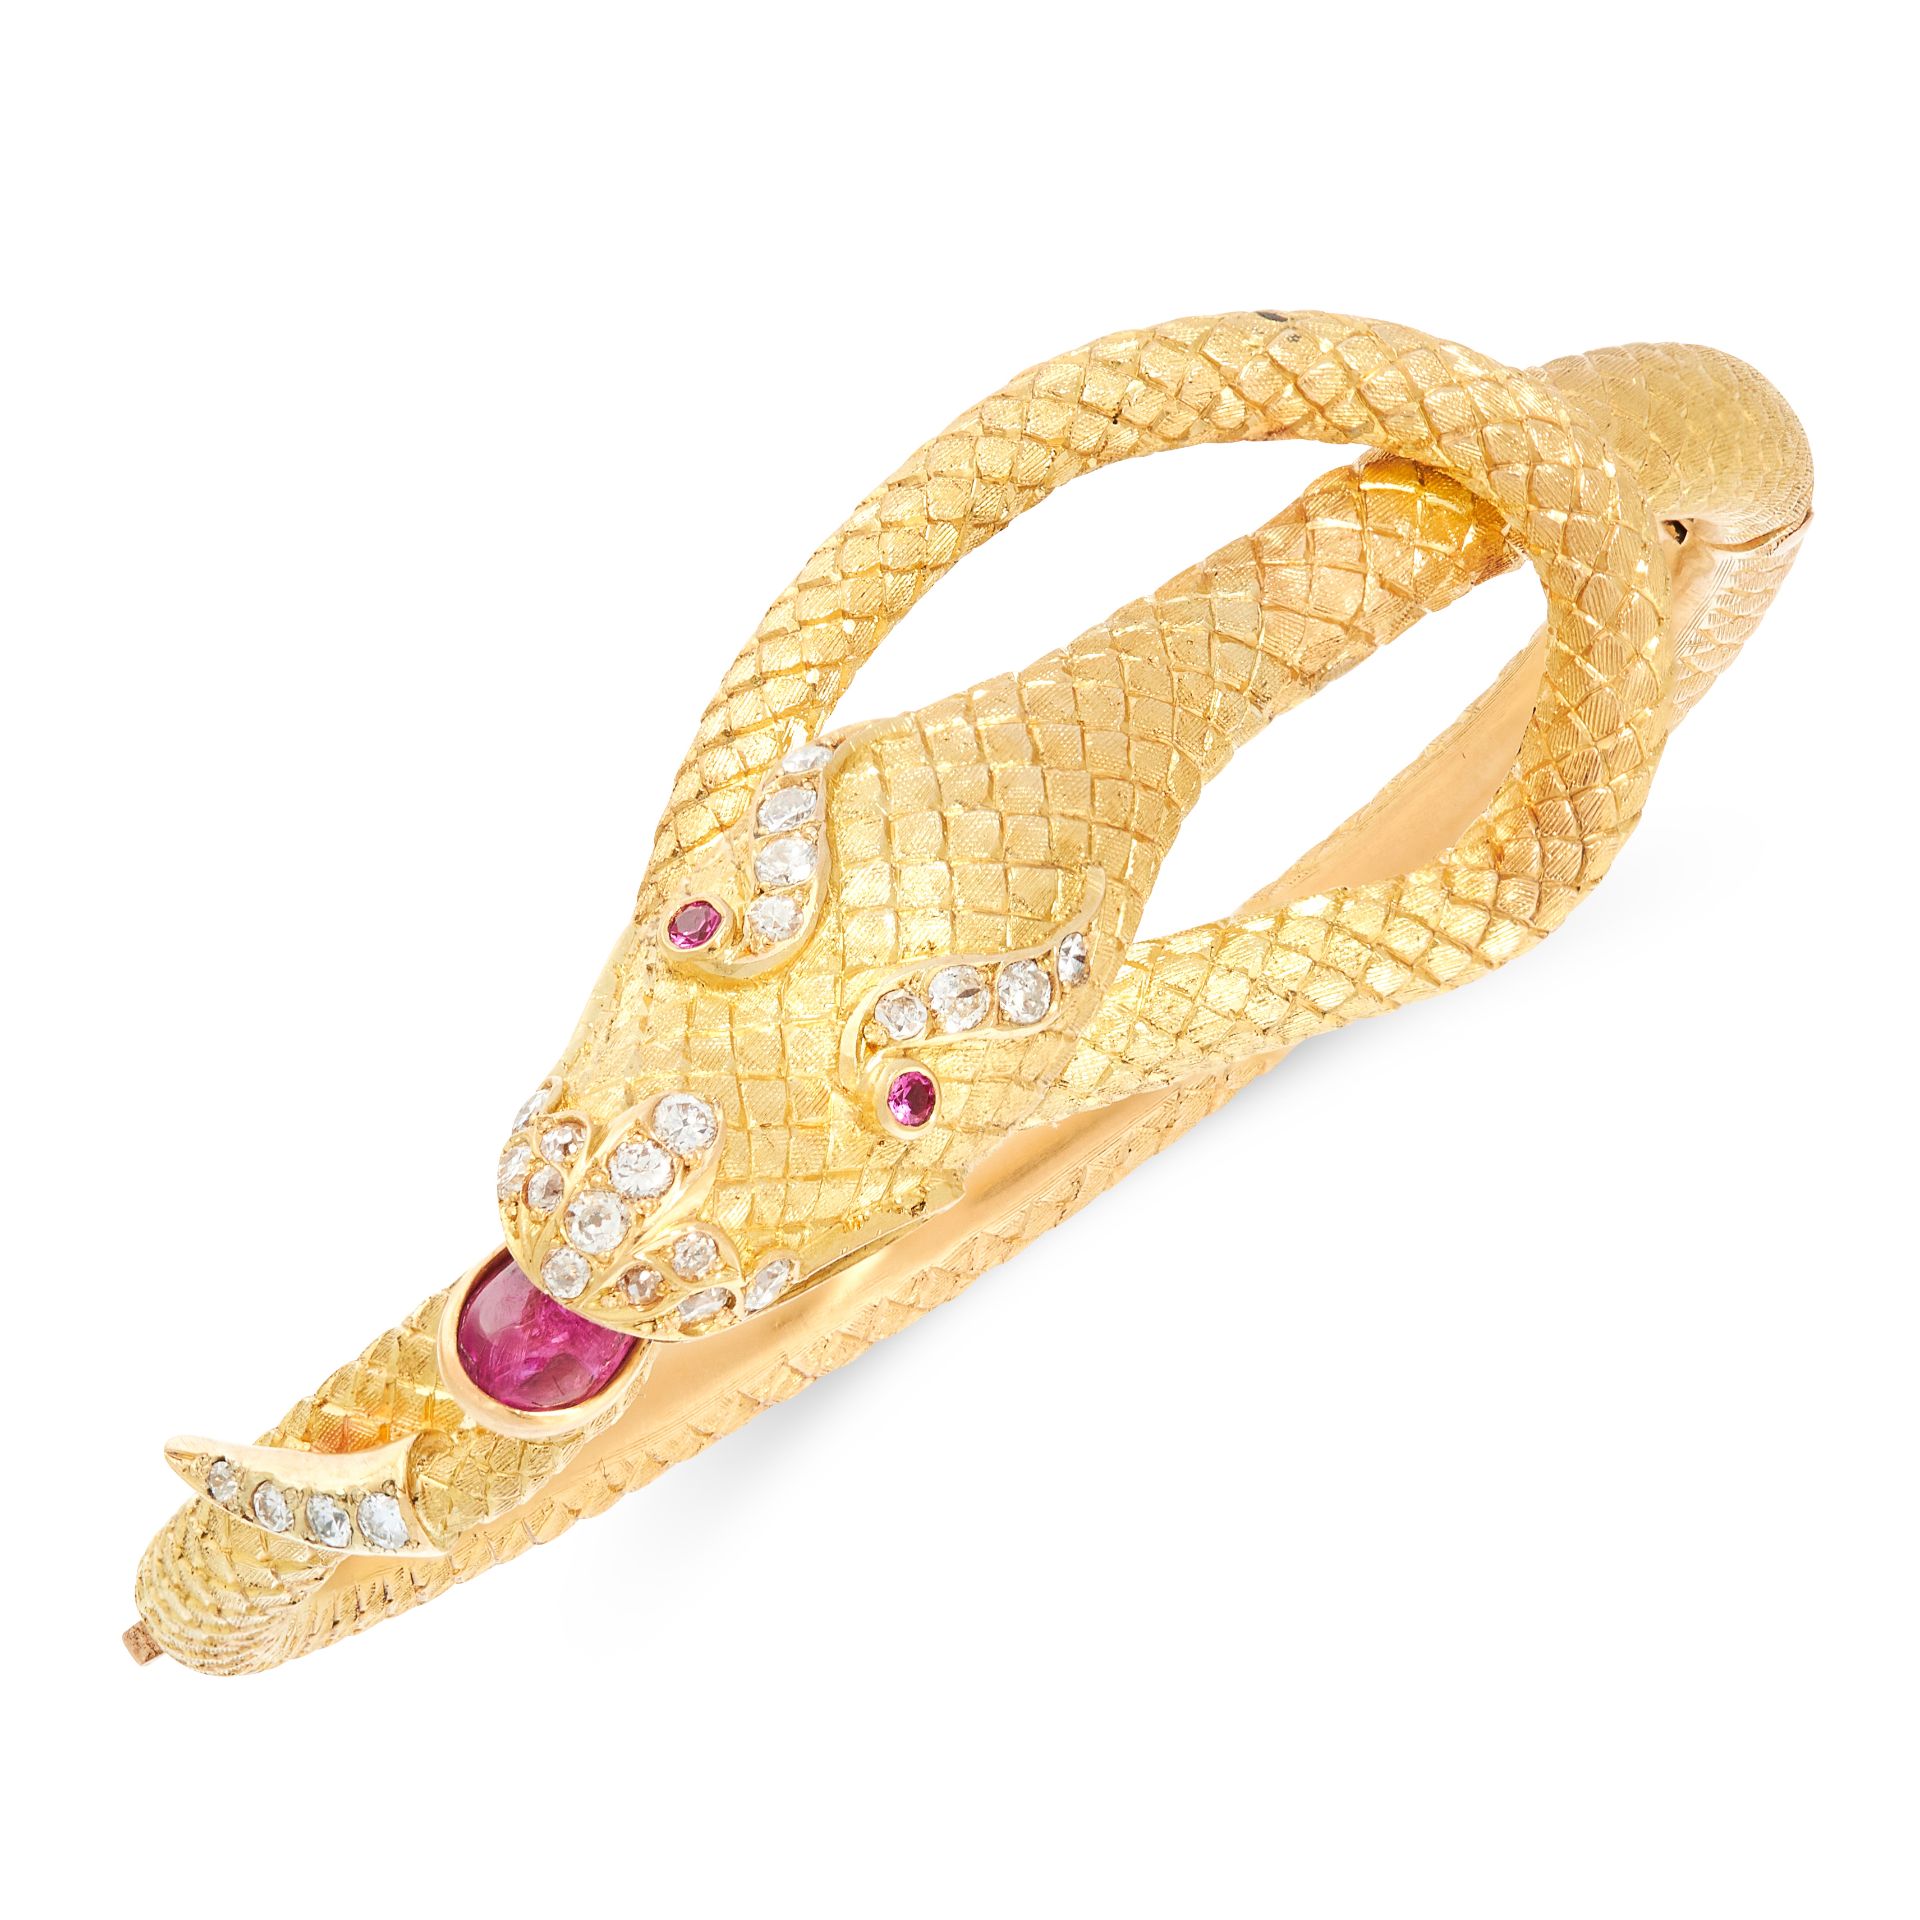 A RUBY AND DIAMOND SNAKE BANGLE in high carat yellow gold, designed as the body of a snake, coiled